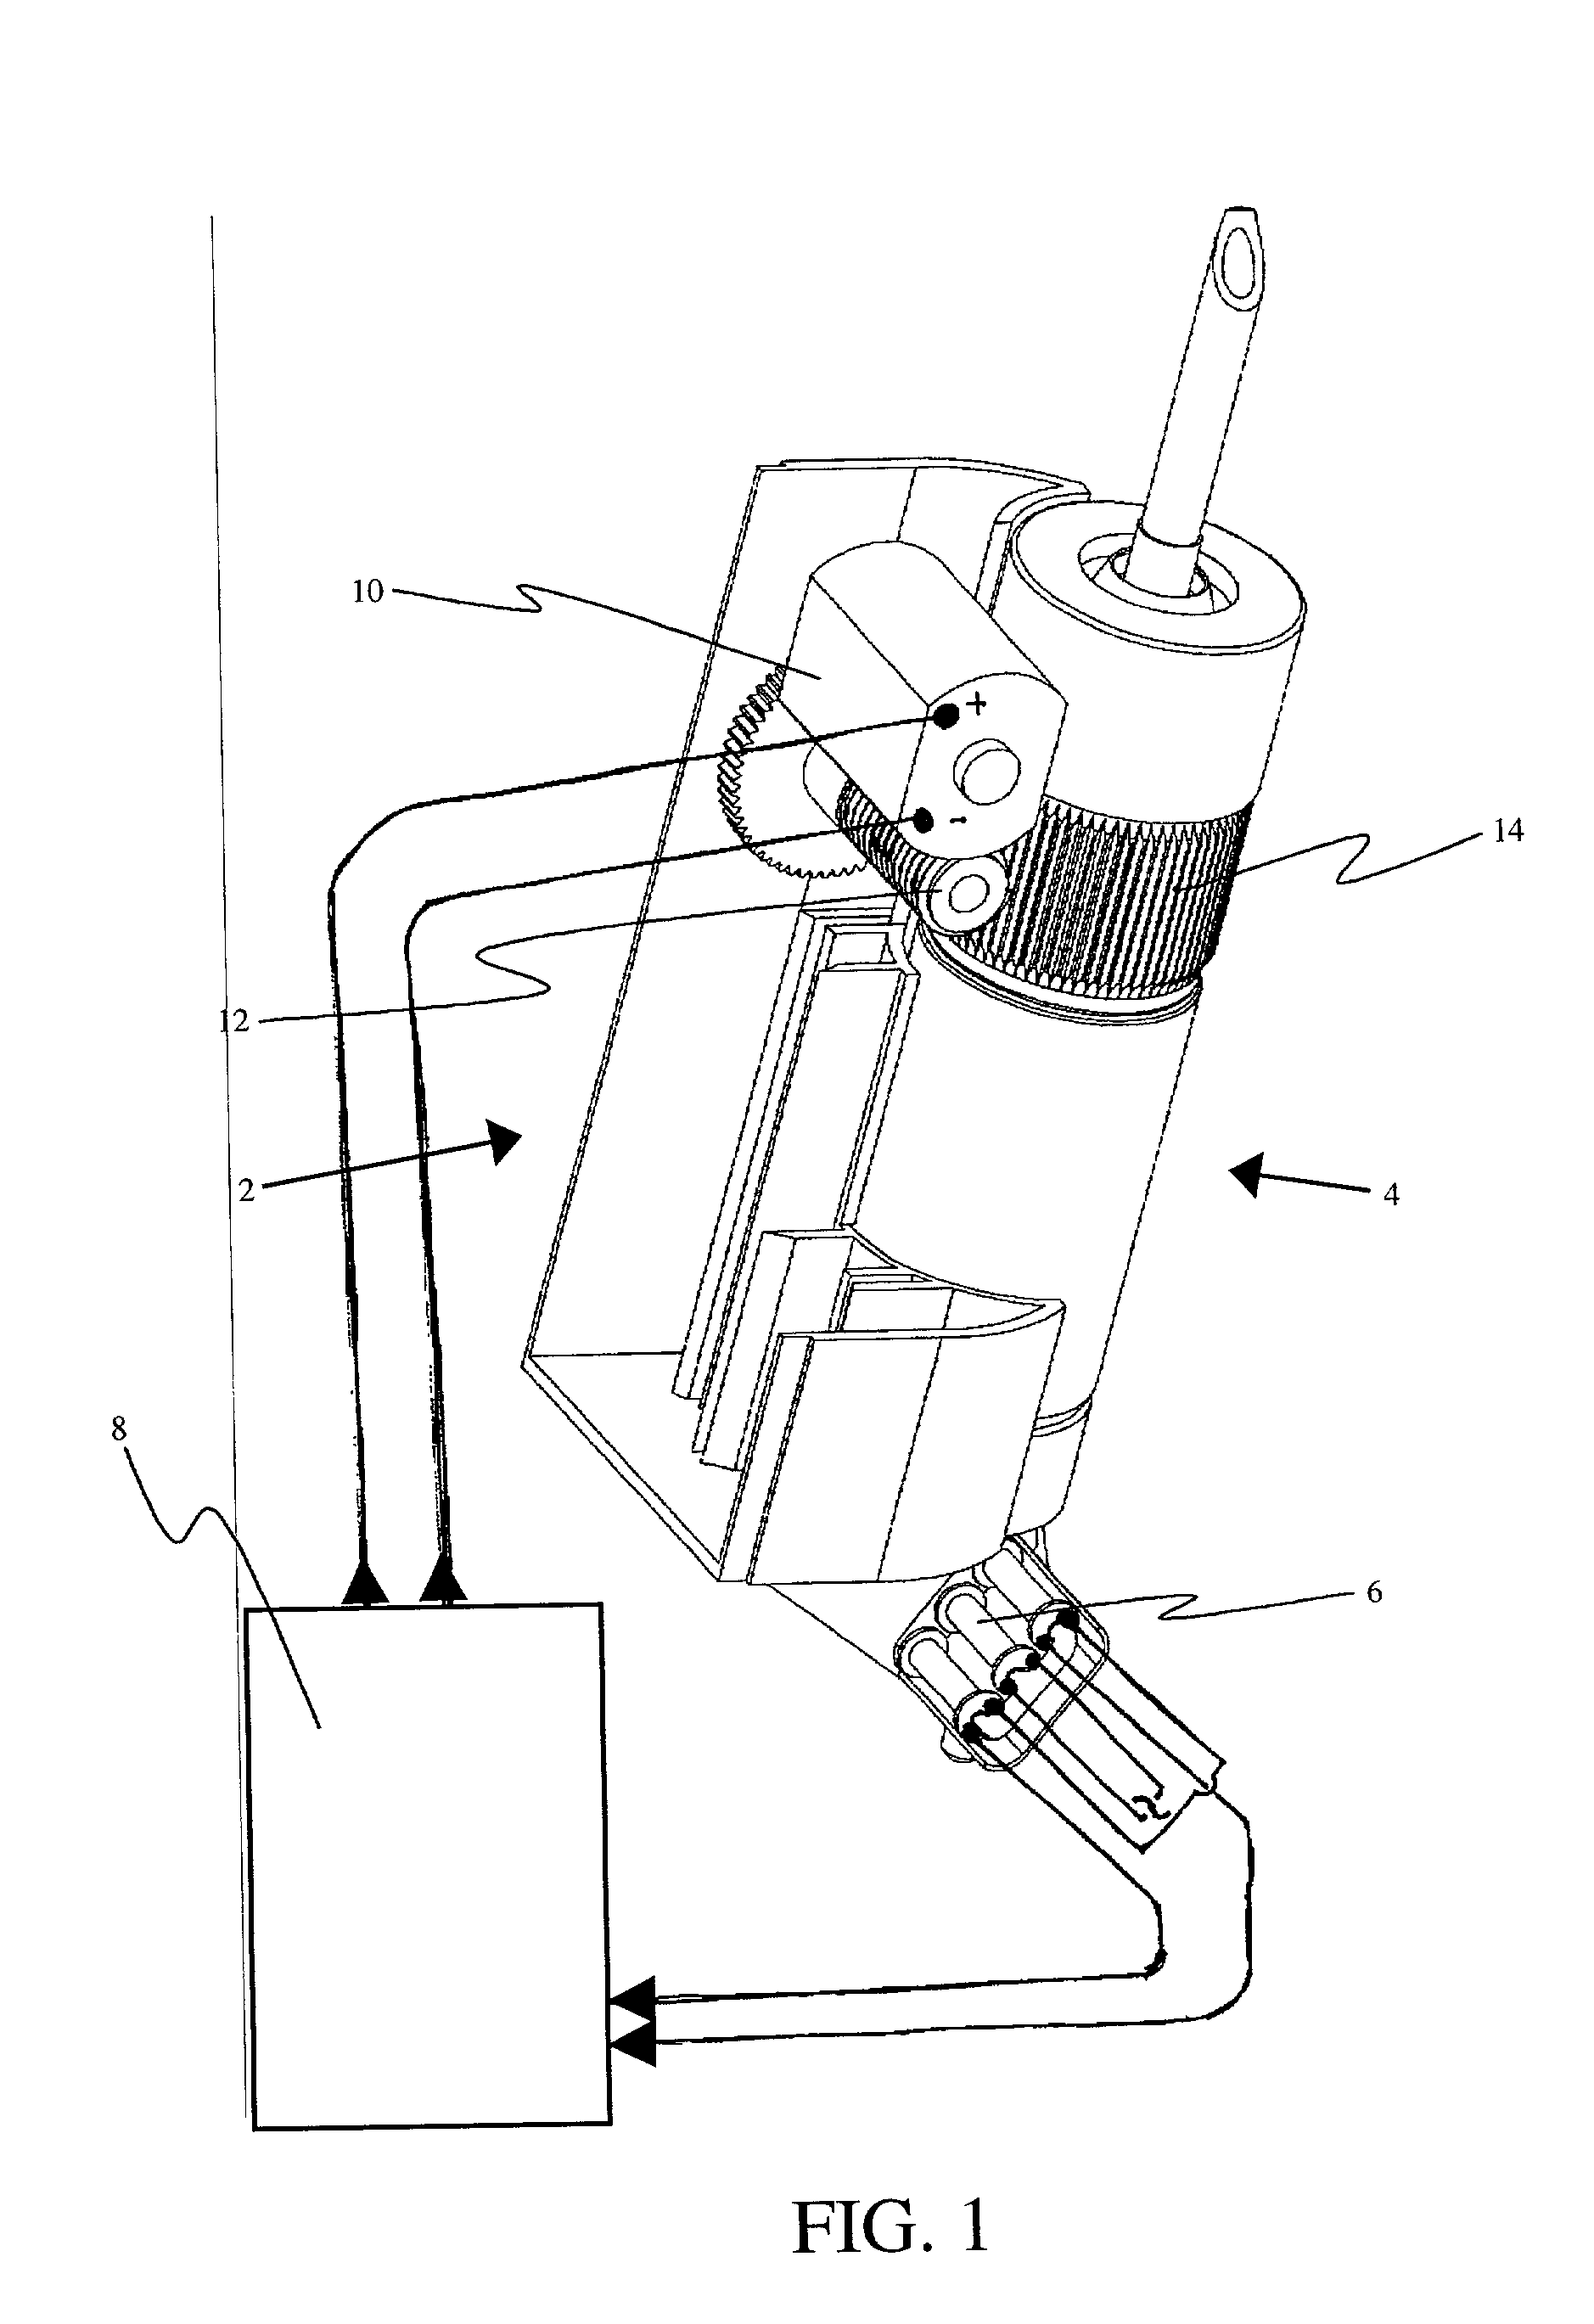 Fluid flow meter for gravity fed intravenous fluid delivery systems